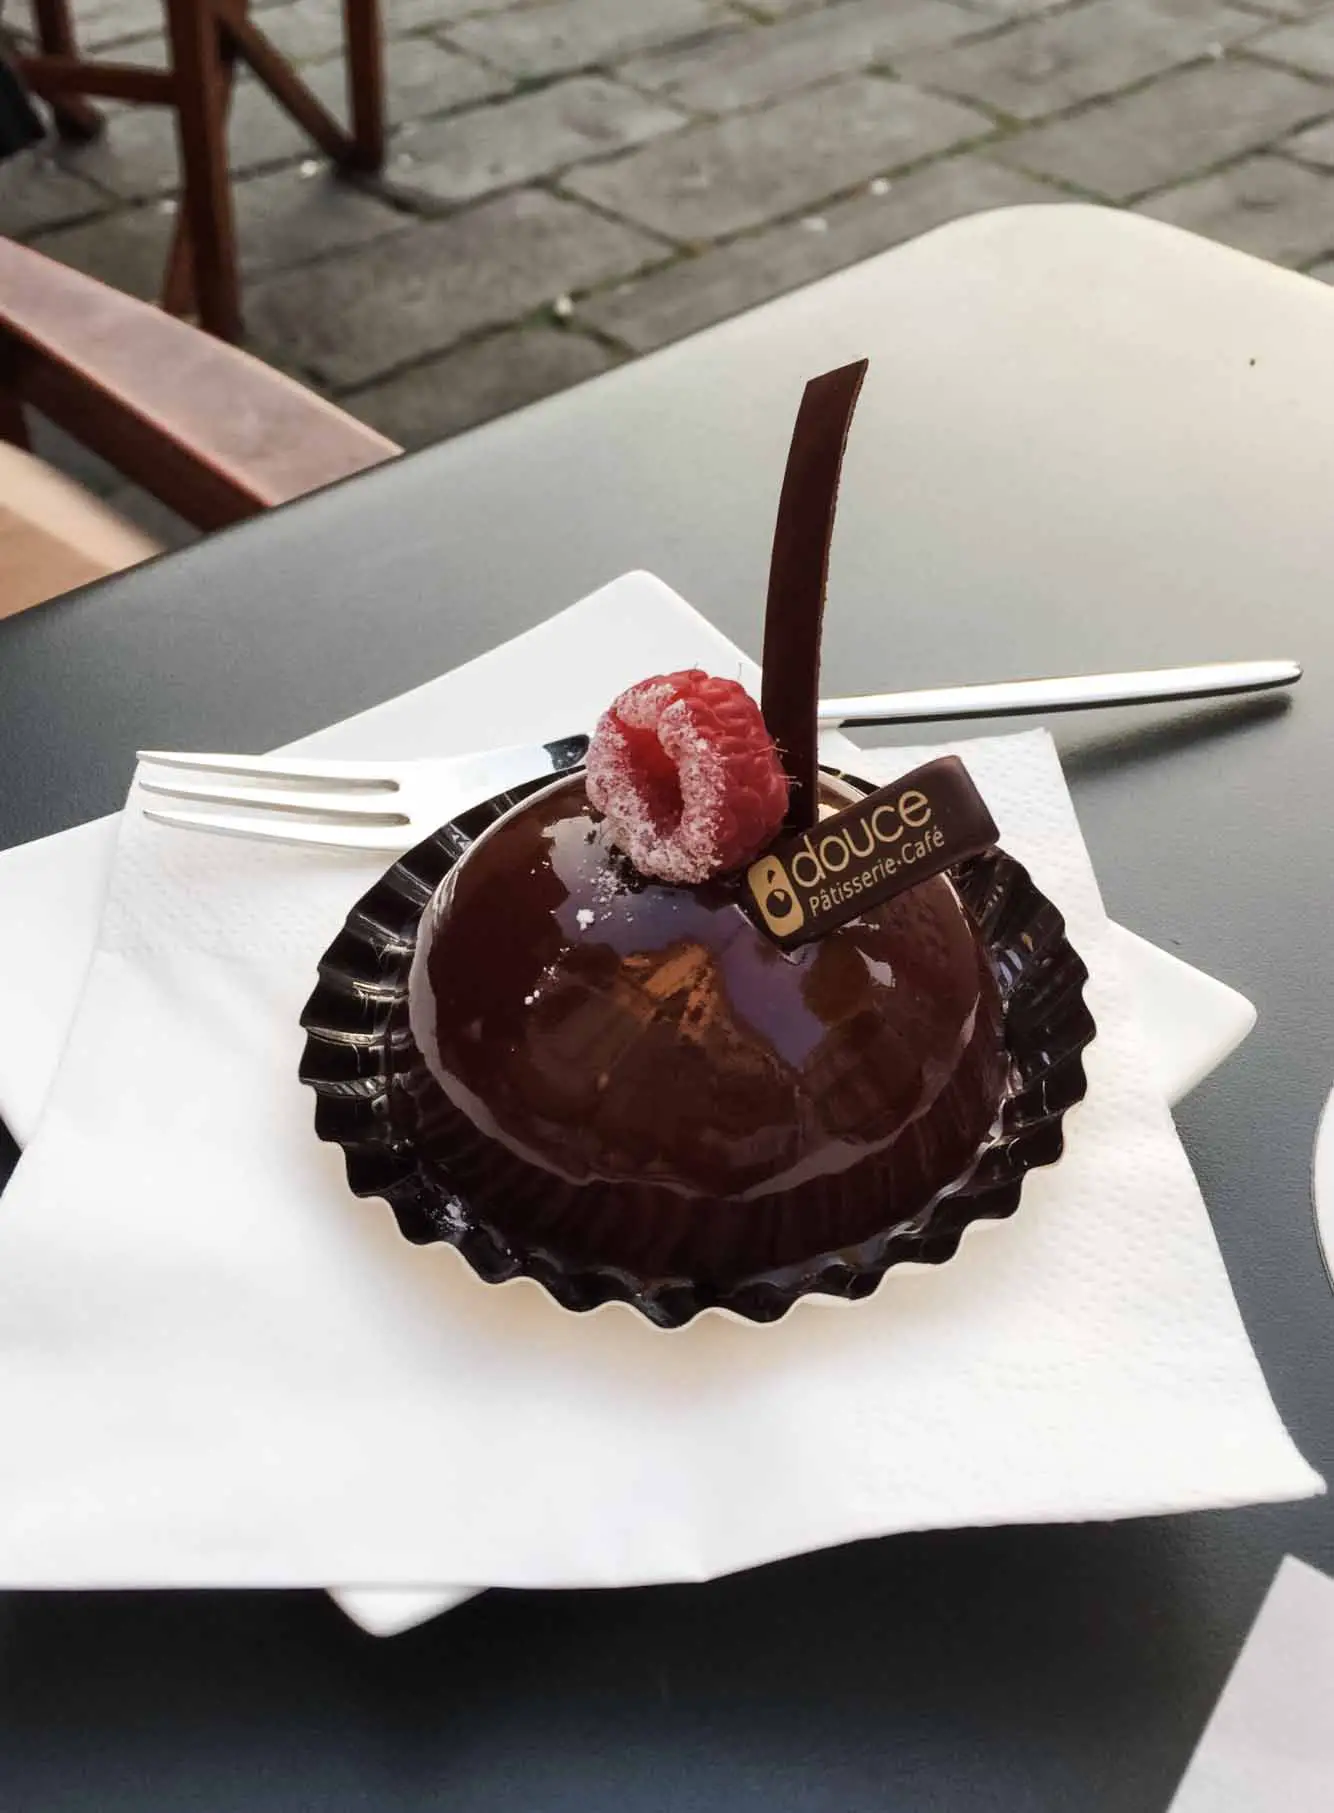 genoa italy douce patisserie cafe dessert dome 15 day italy vacation